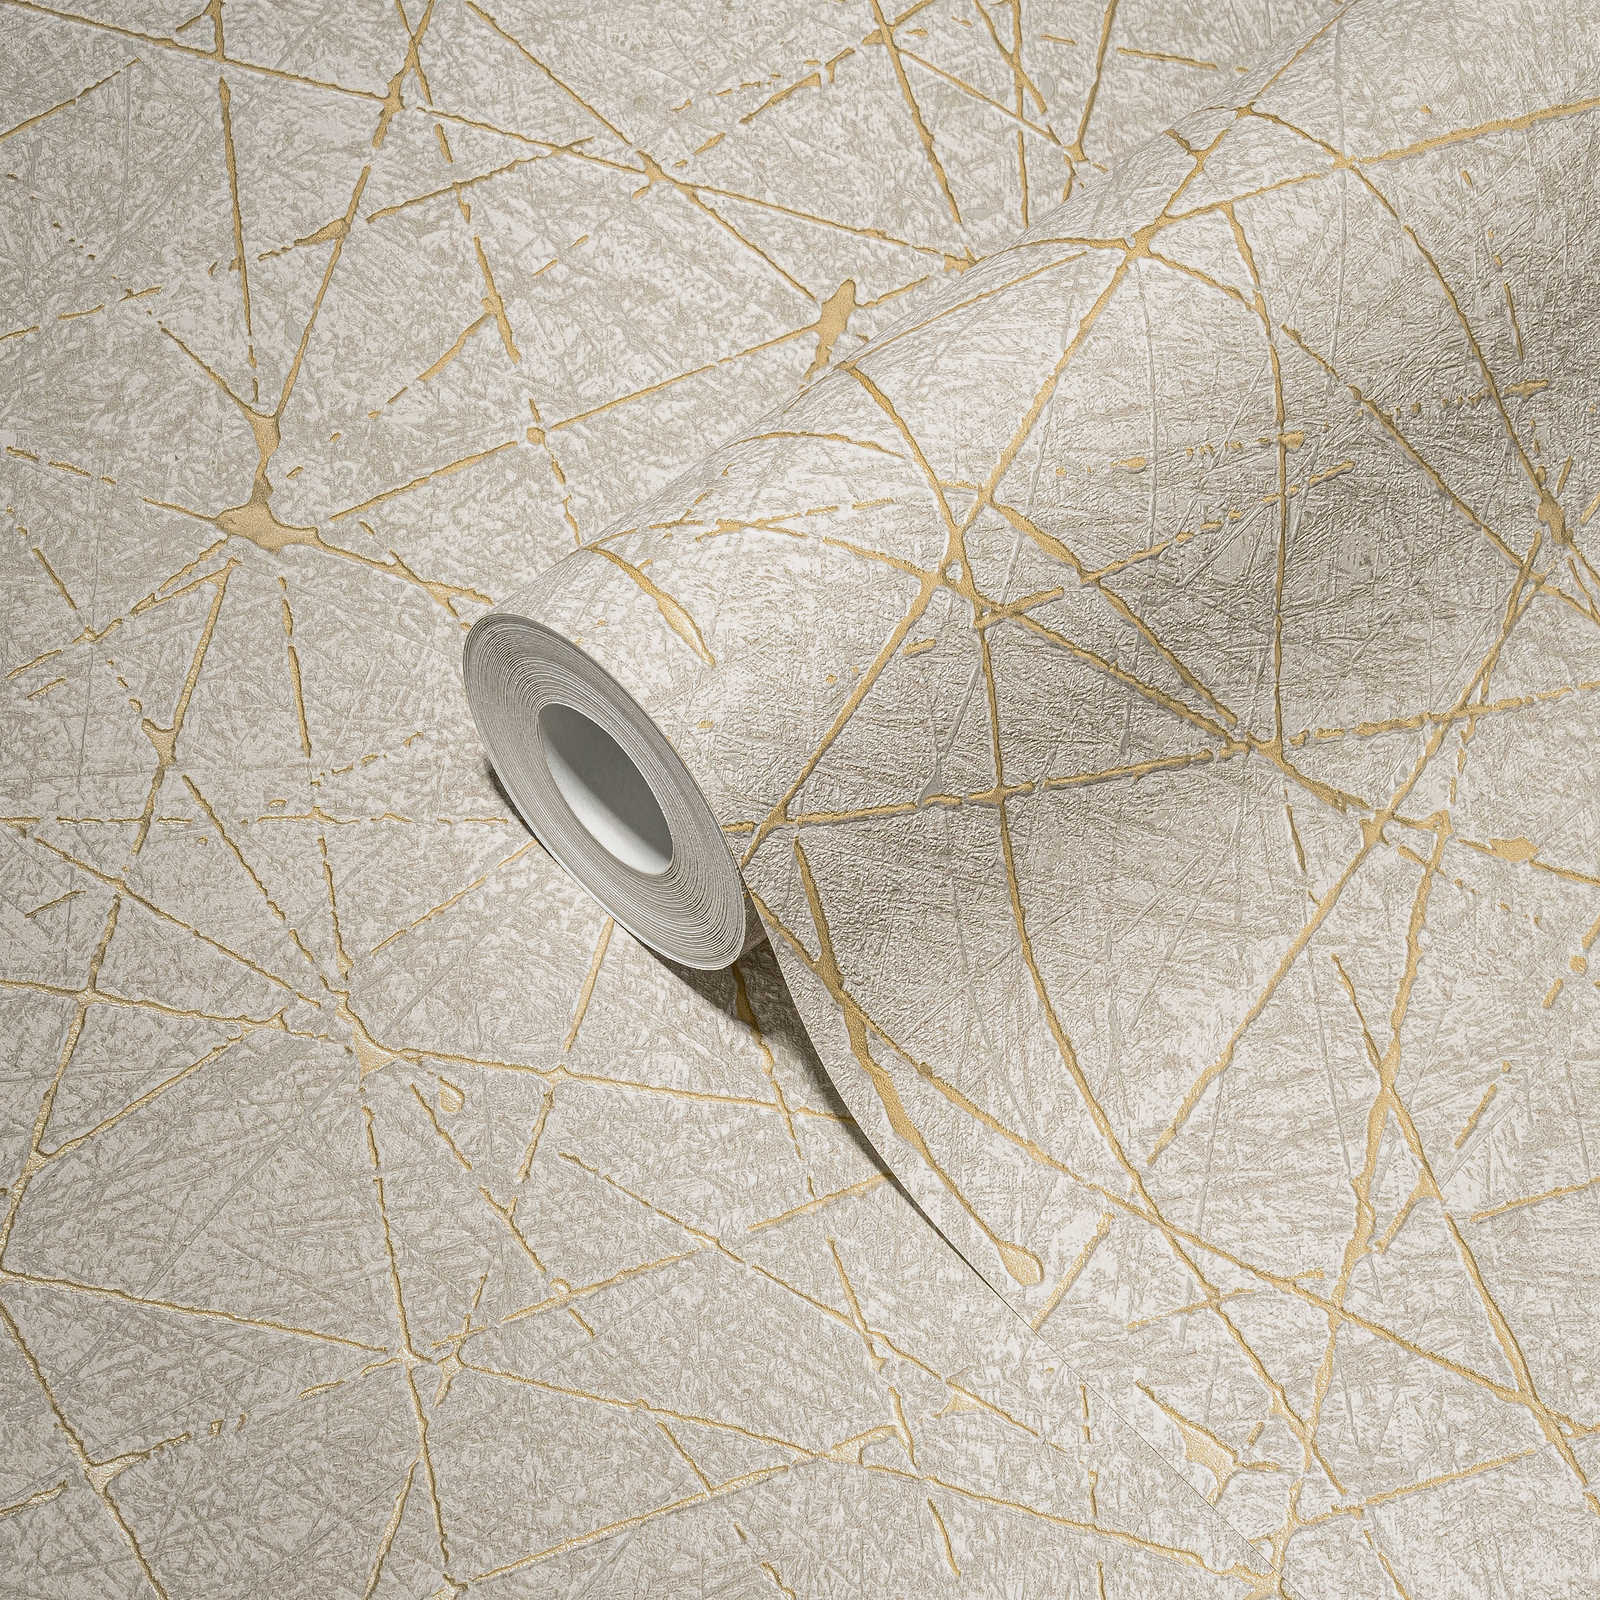             Non-woven wallpaper with graphic lines & metallic effect - cream, grey, gold
        